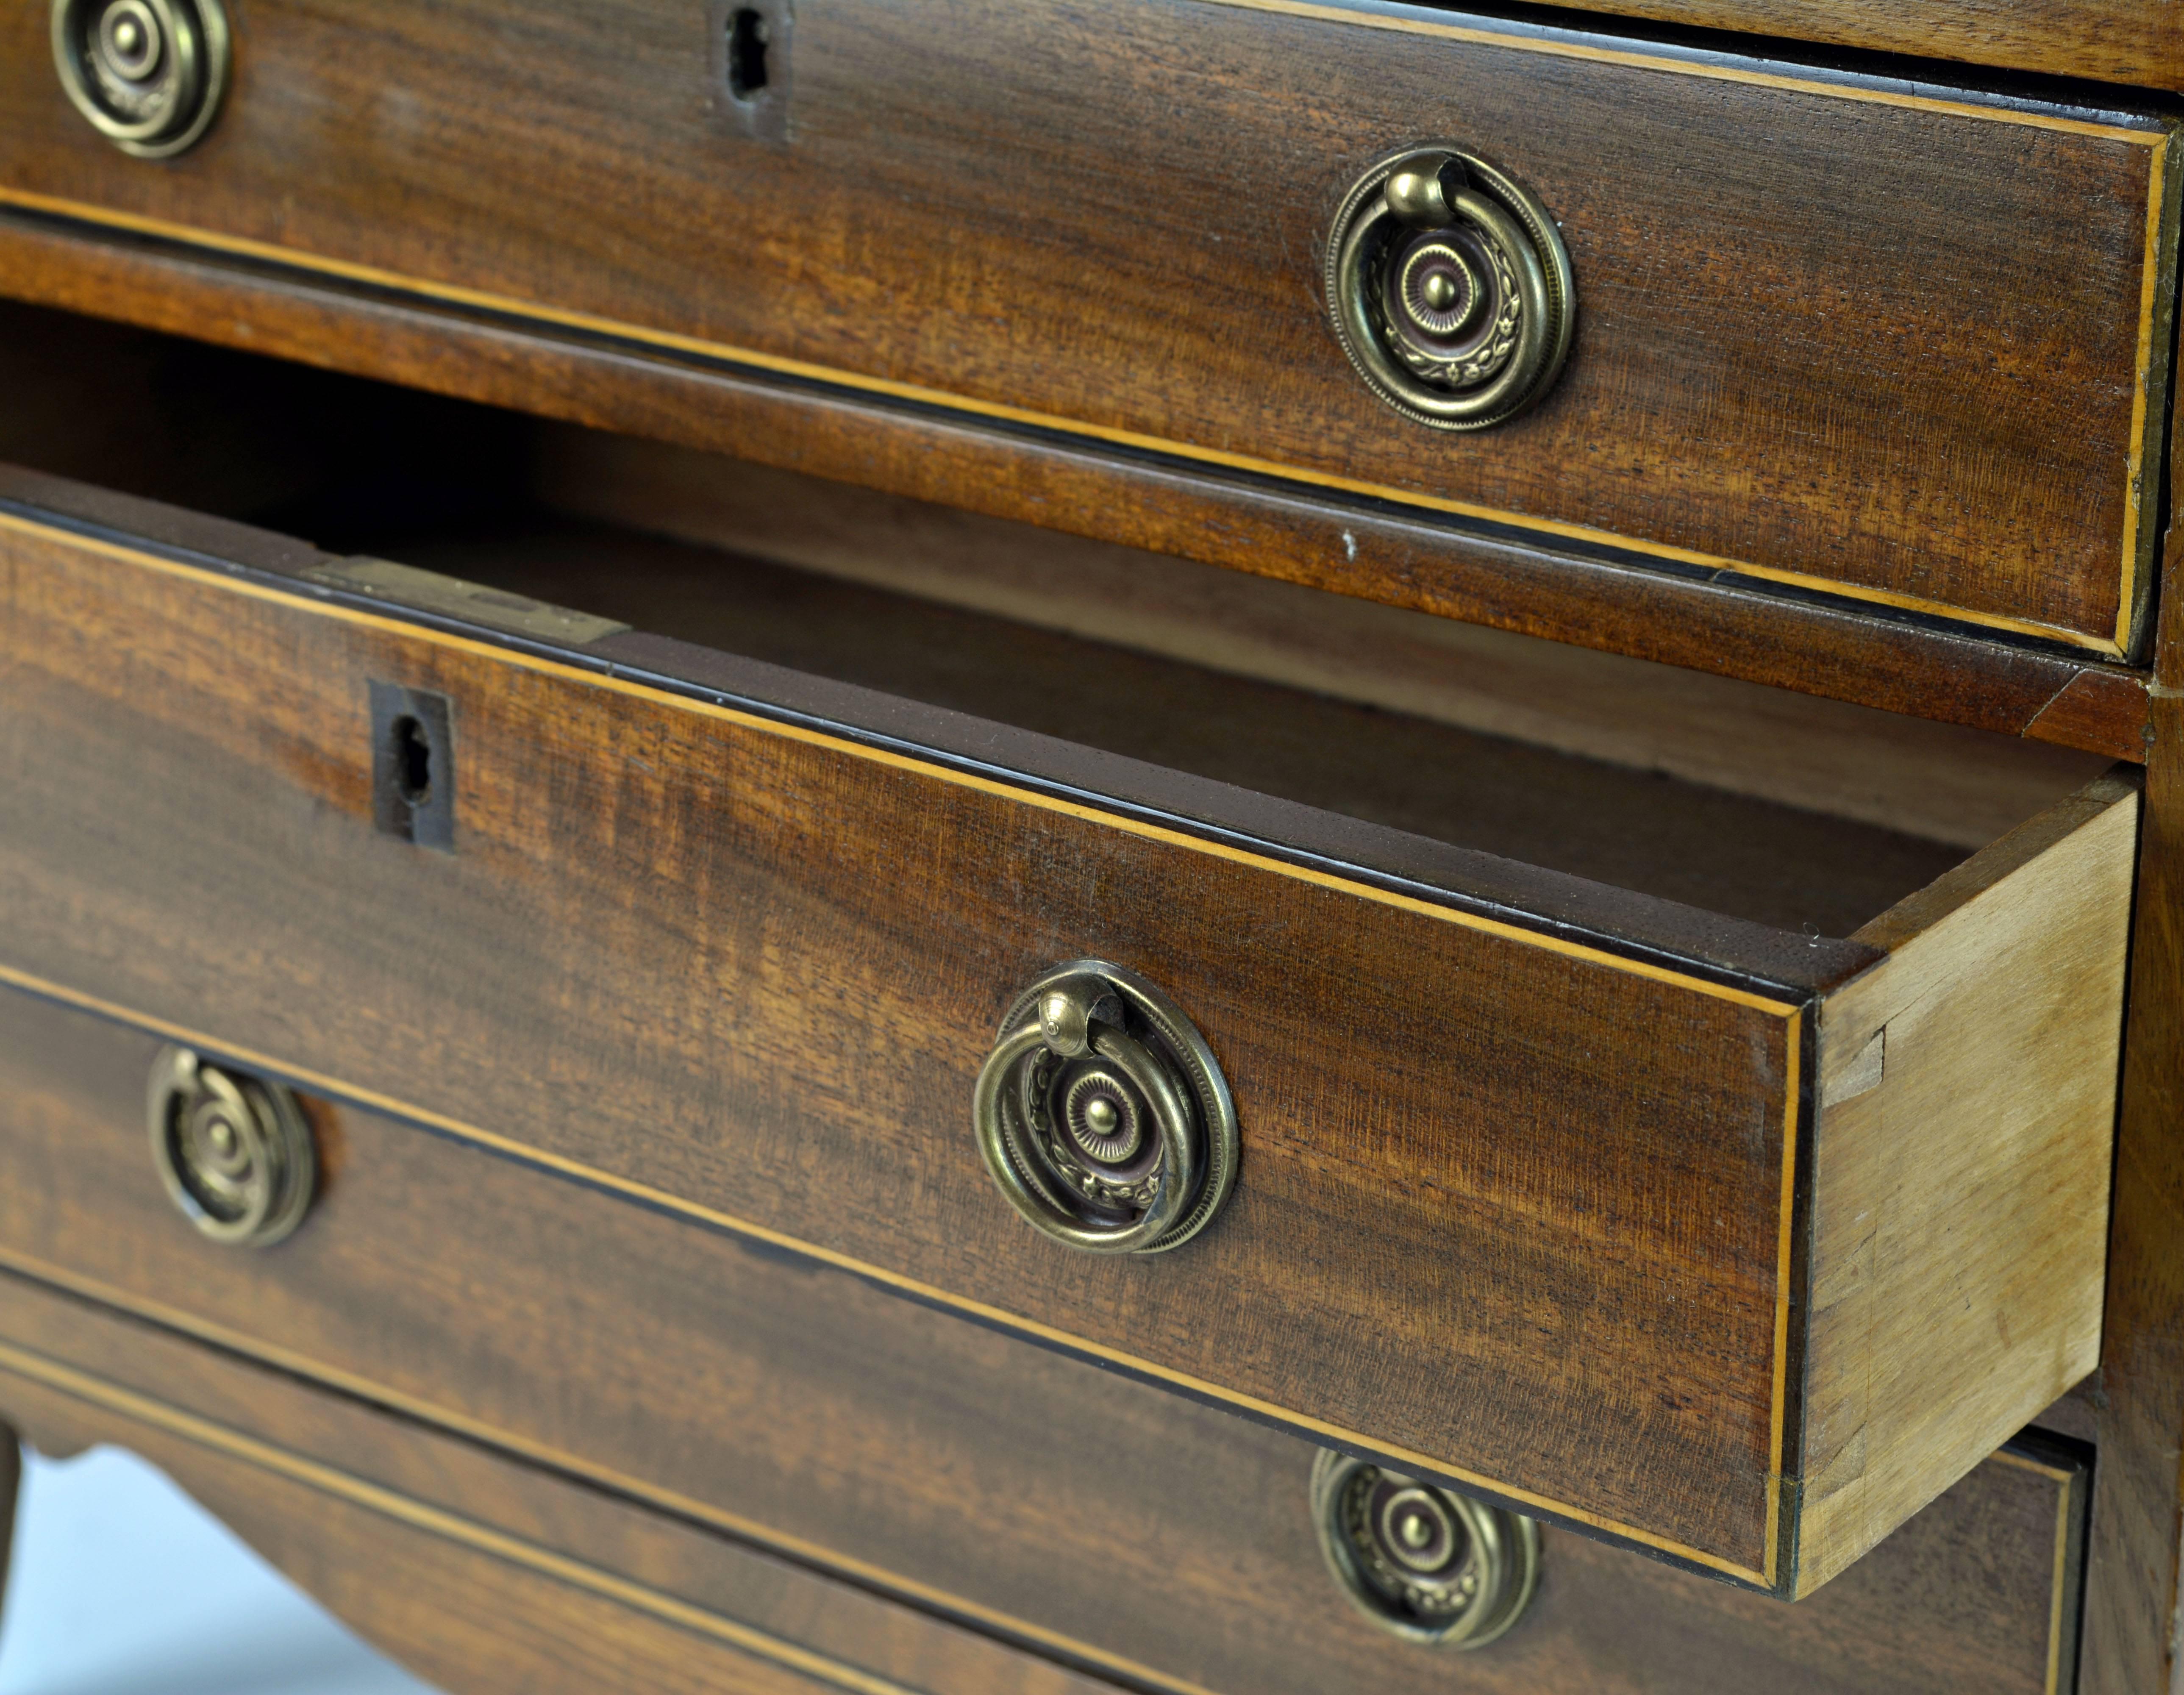 19th Century Lovely English George III Mahogany Miniature Chest of Drawers or Jewelry Chest